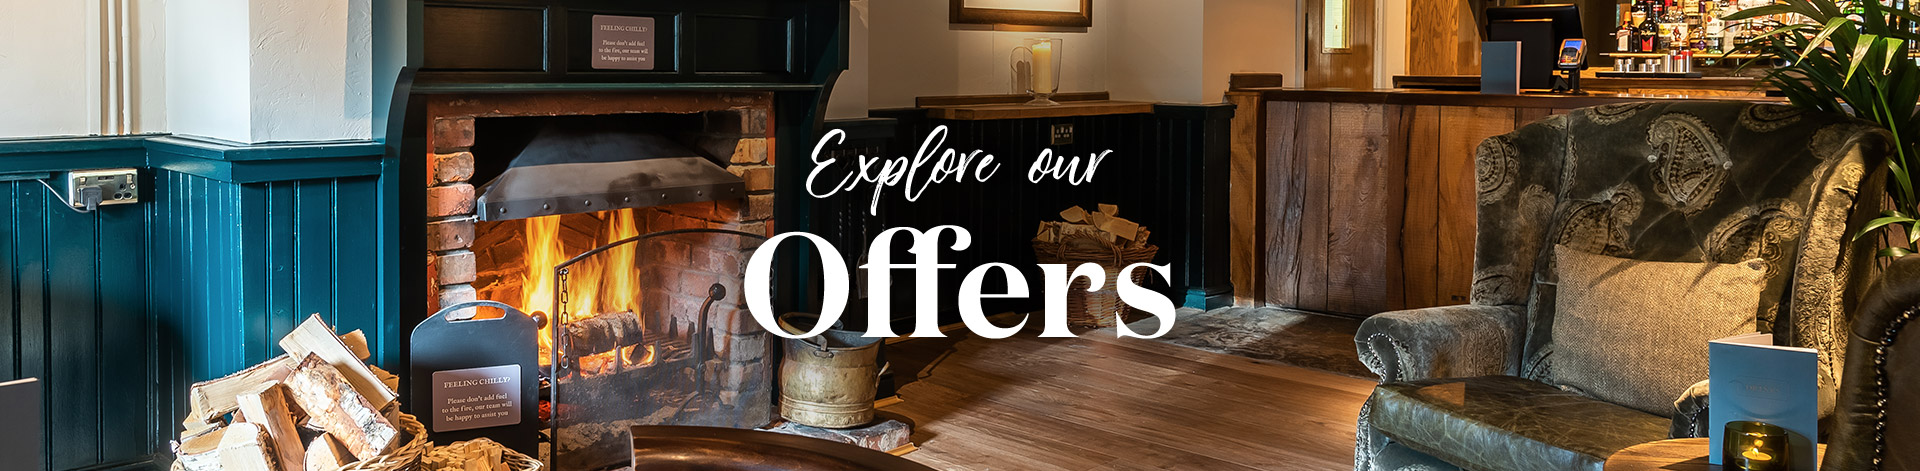 Our latest offers at The Traveller's Rest, Edlesborough